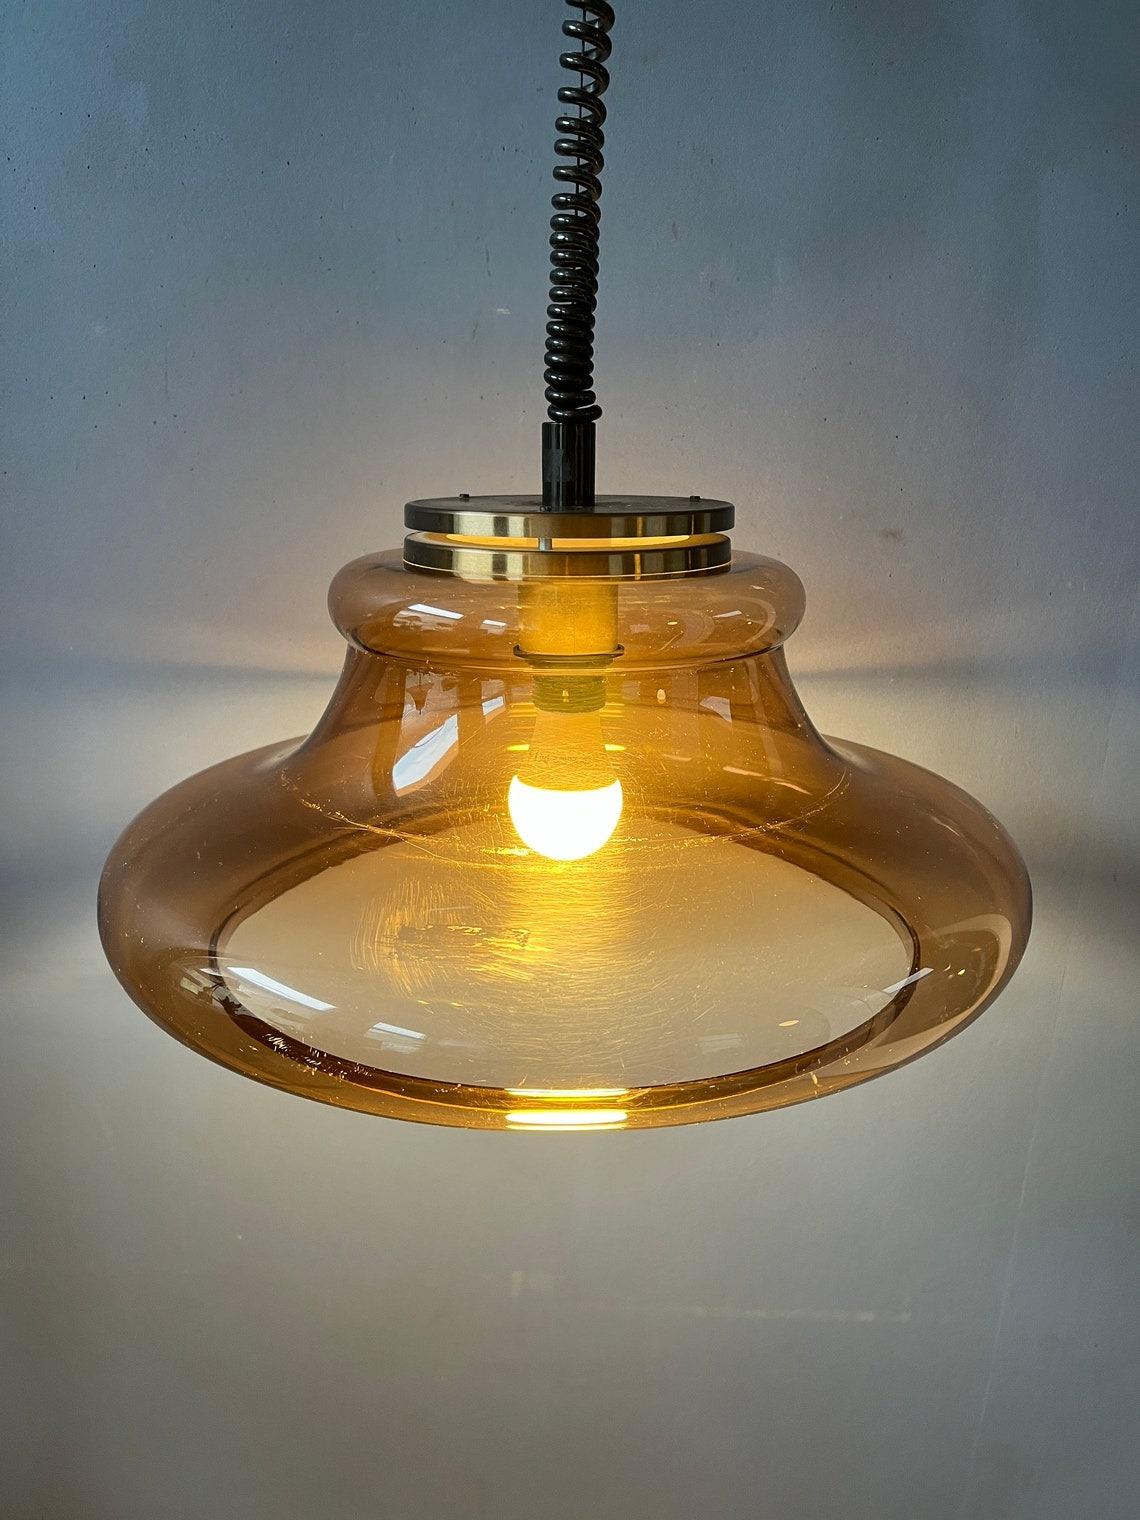 A space age pendant lamp by Herda with transparent shade. The shade consists of acrylic glass in a copper-like colour. The height of the lamp can be adjusted with the rise-and-fall system.

Additional information:
Materials: Metal, plastic
Period: